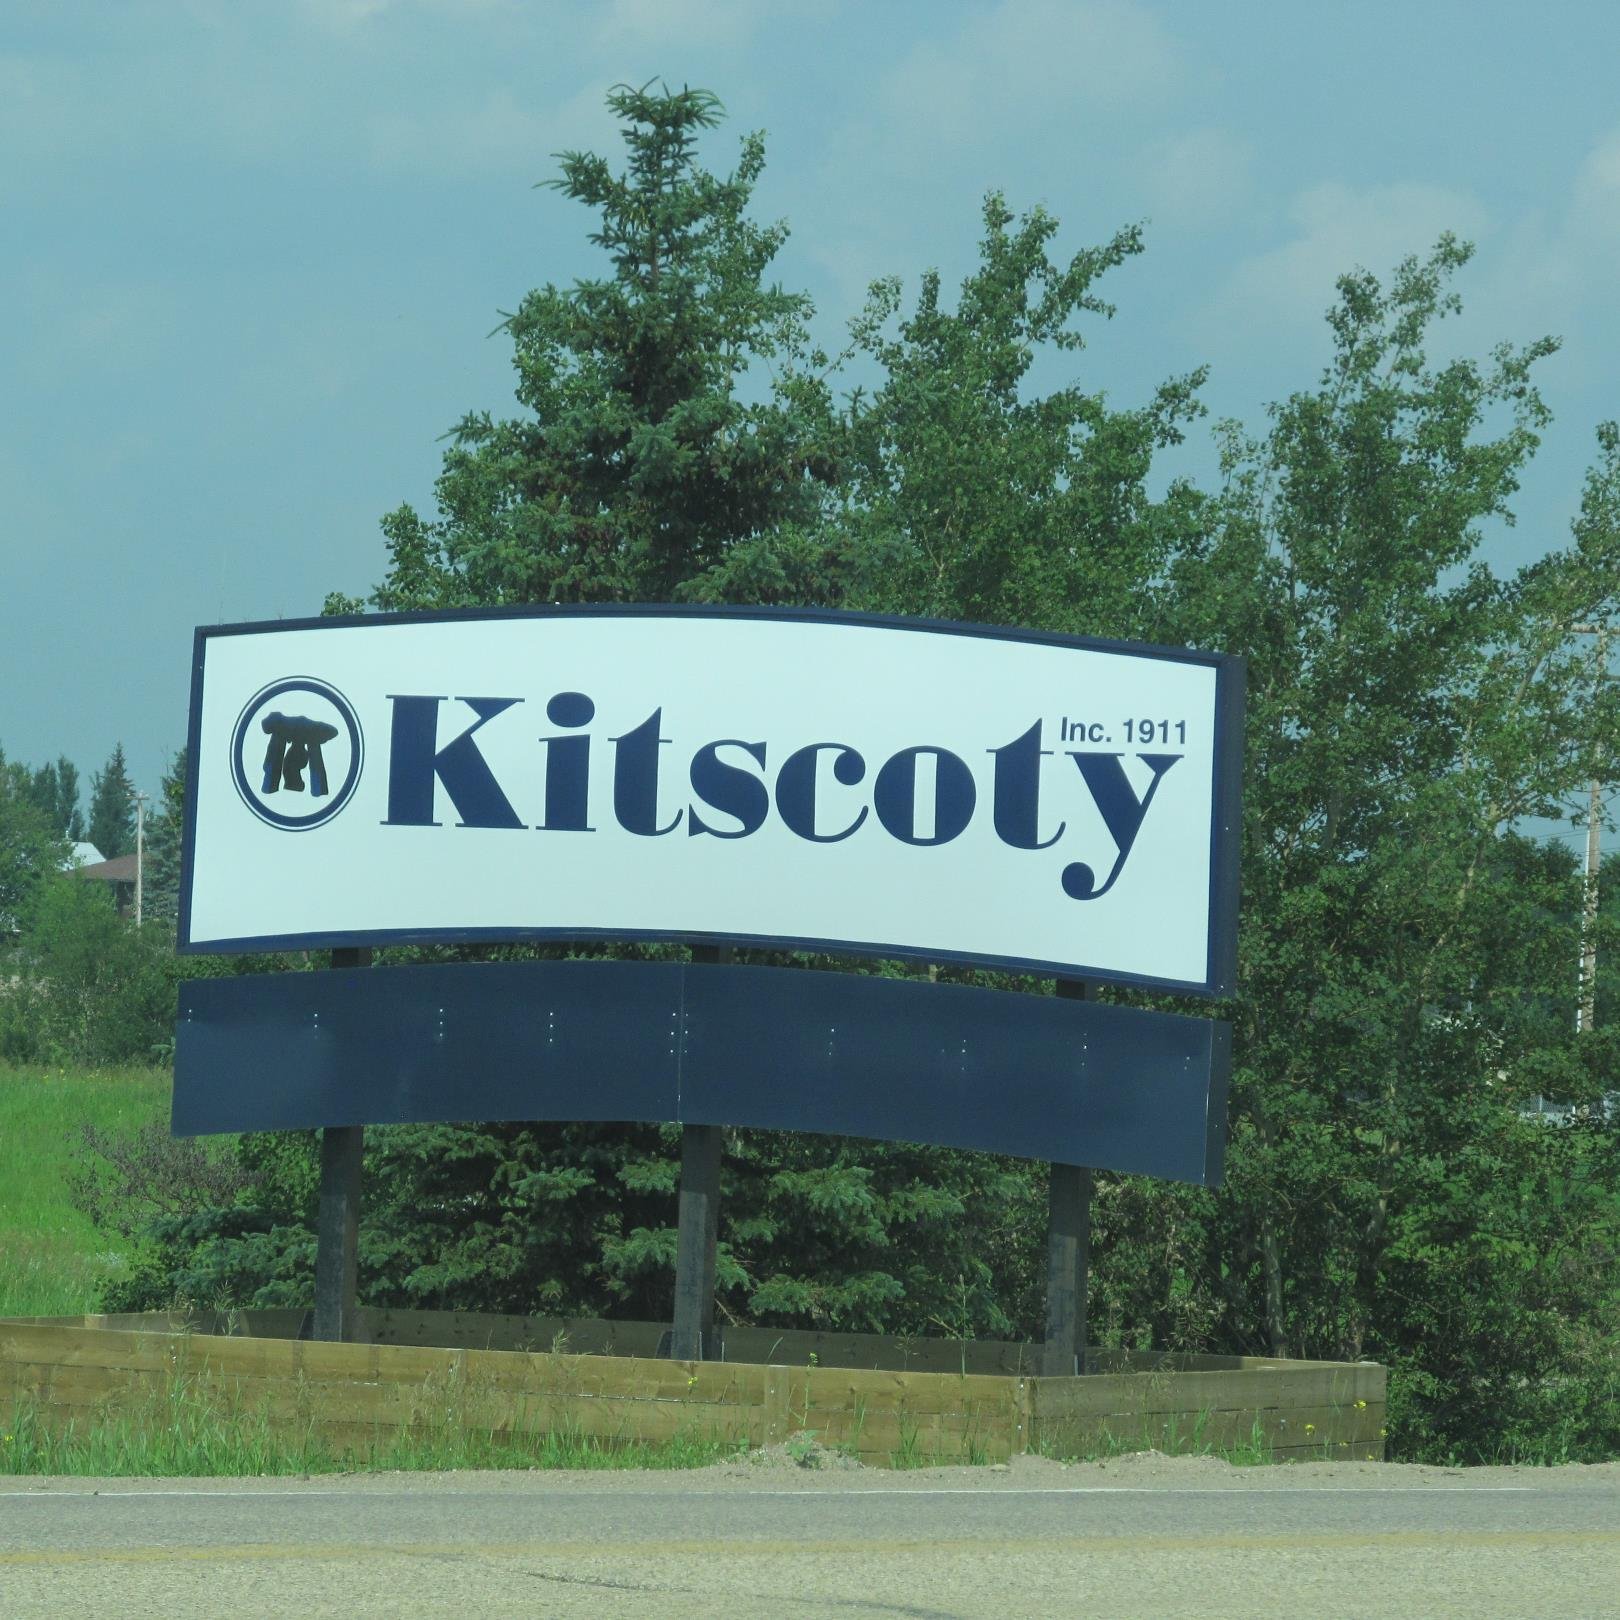 Kitscoty - a vibrant and thriving community in NE Alberta. This account is monitored during business hours.